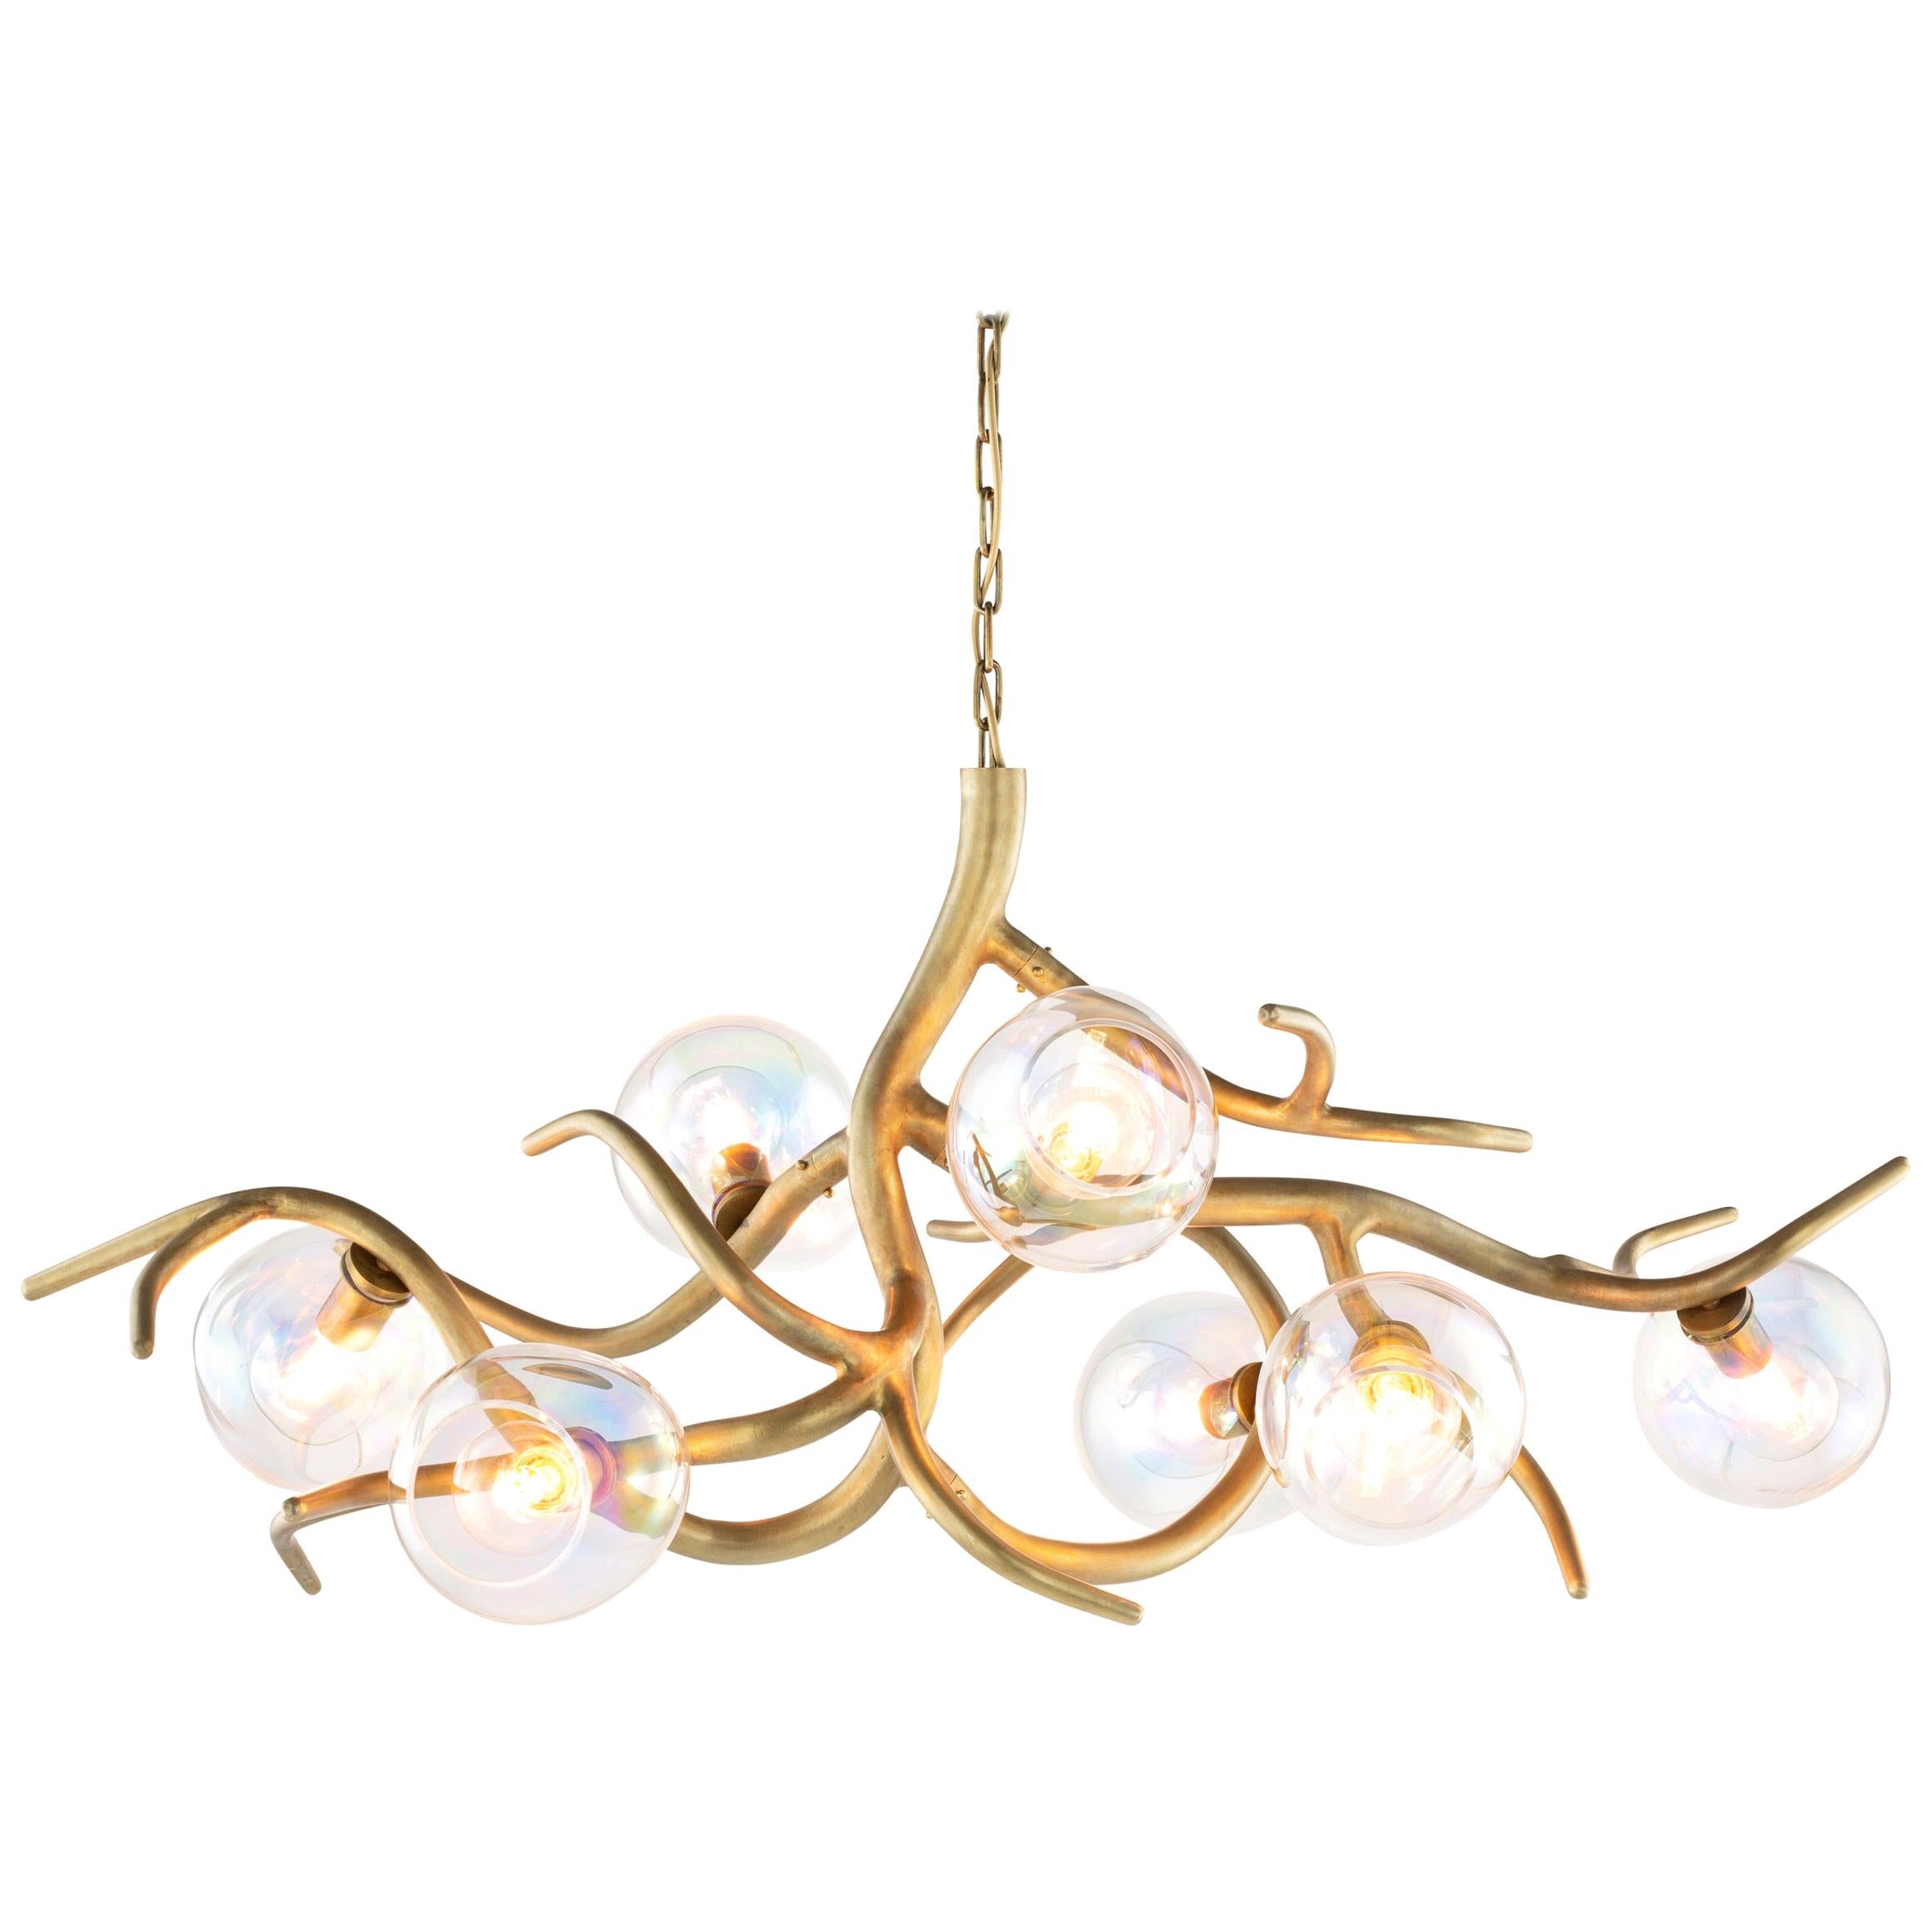 Modern Chandelier with Colored Glass in a Brass Burnished Finish, Ersa